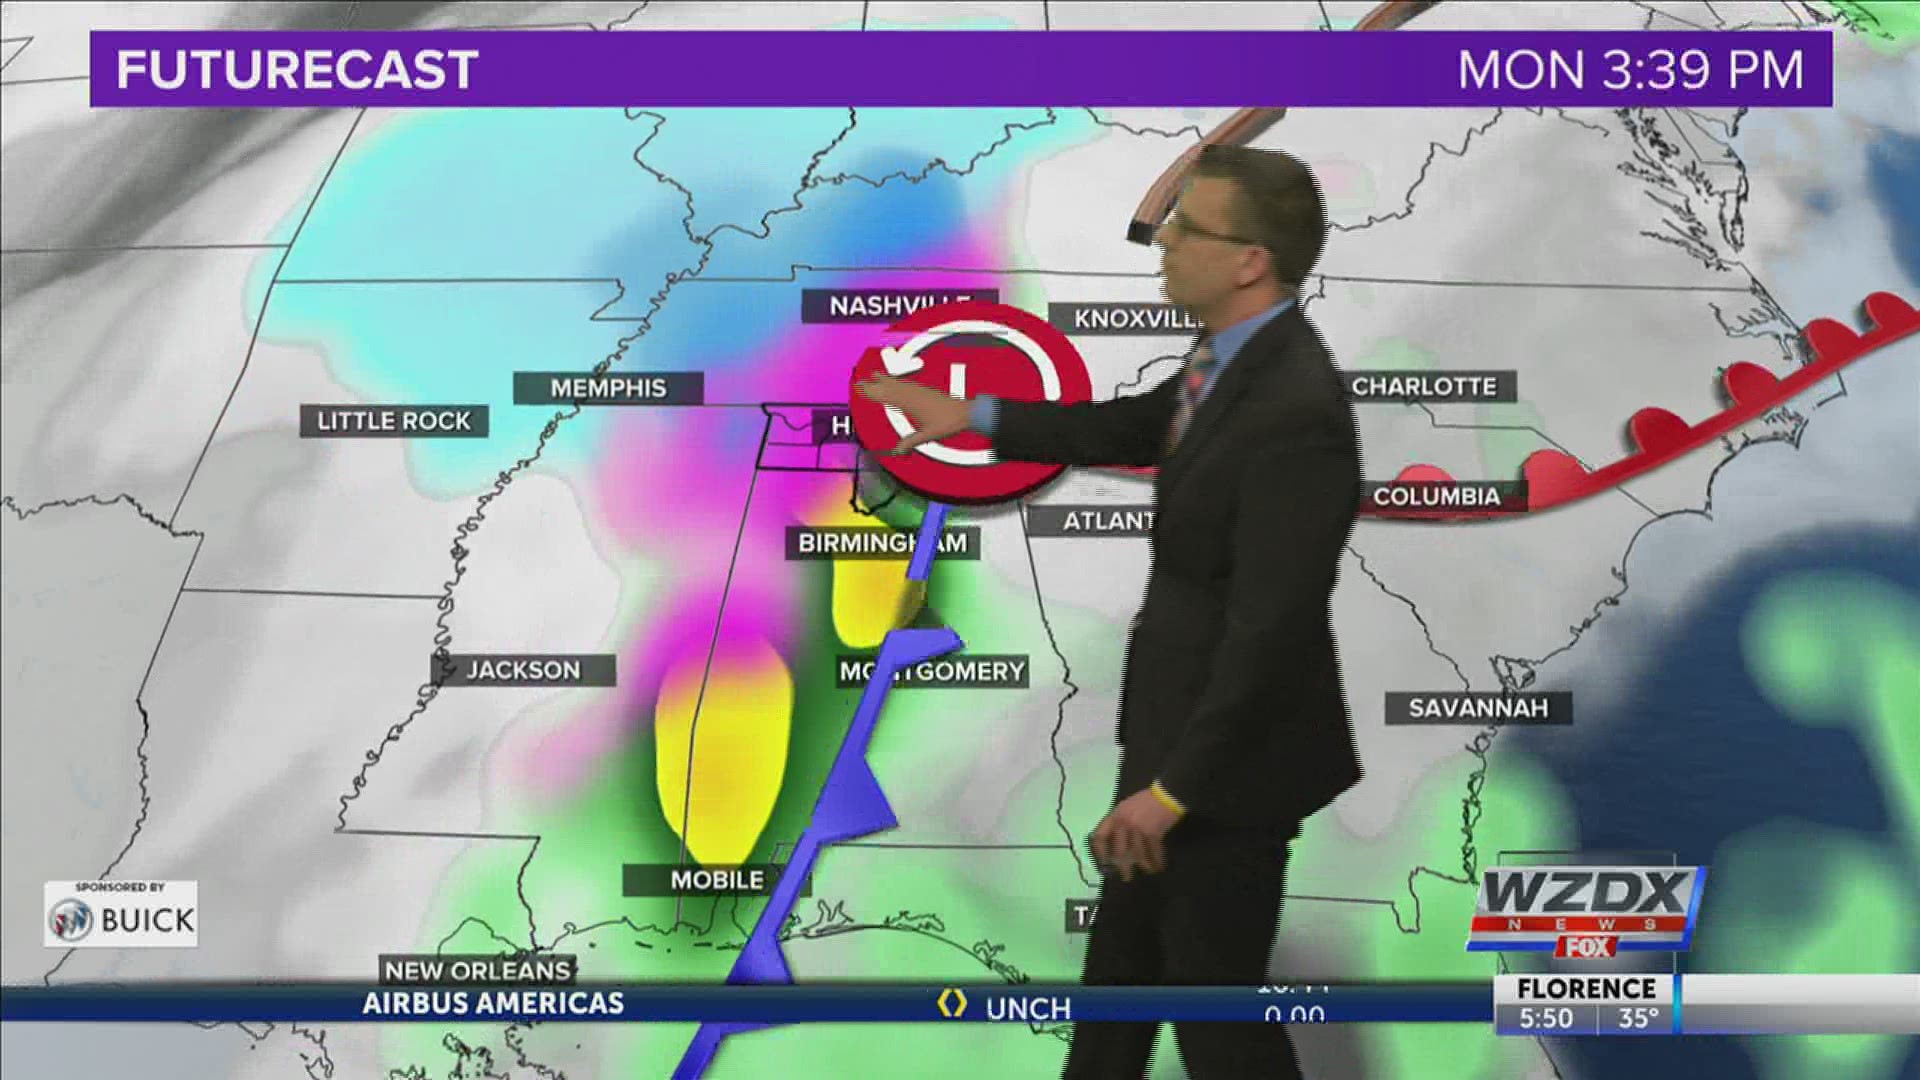 Freezing Rain Possible in the Tennessee Valley